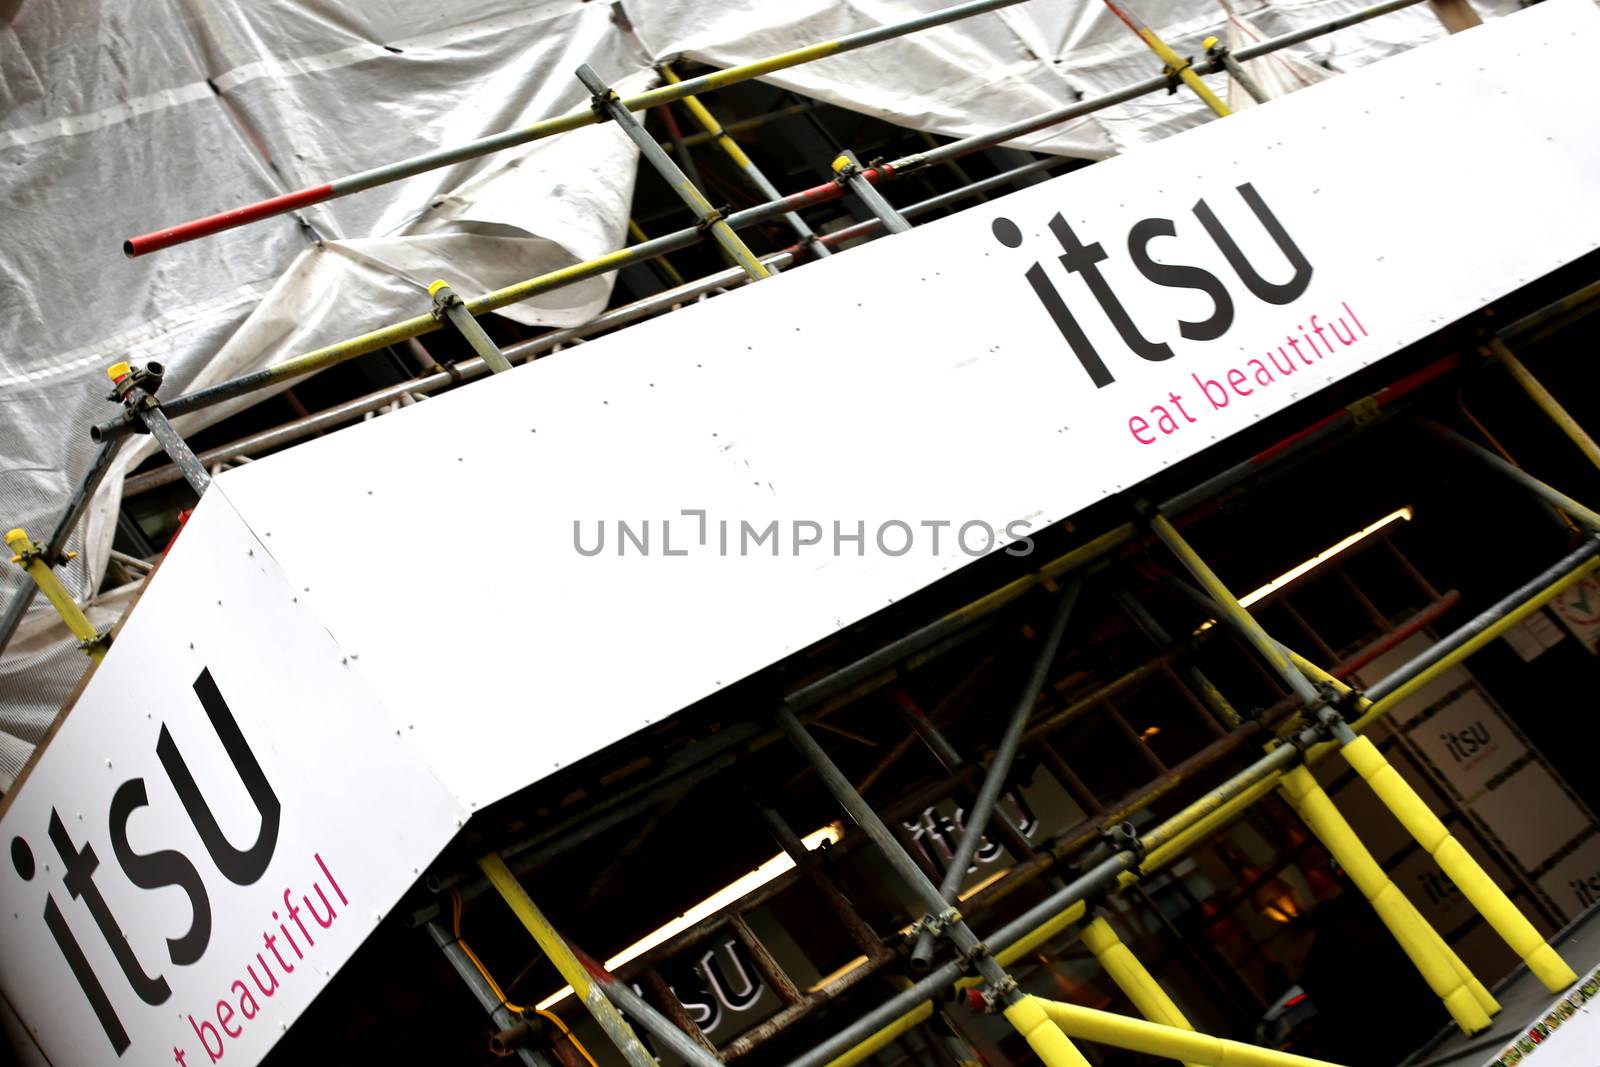 Itsu Fast Food Outlet Oxford Street London